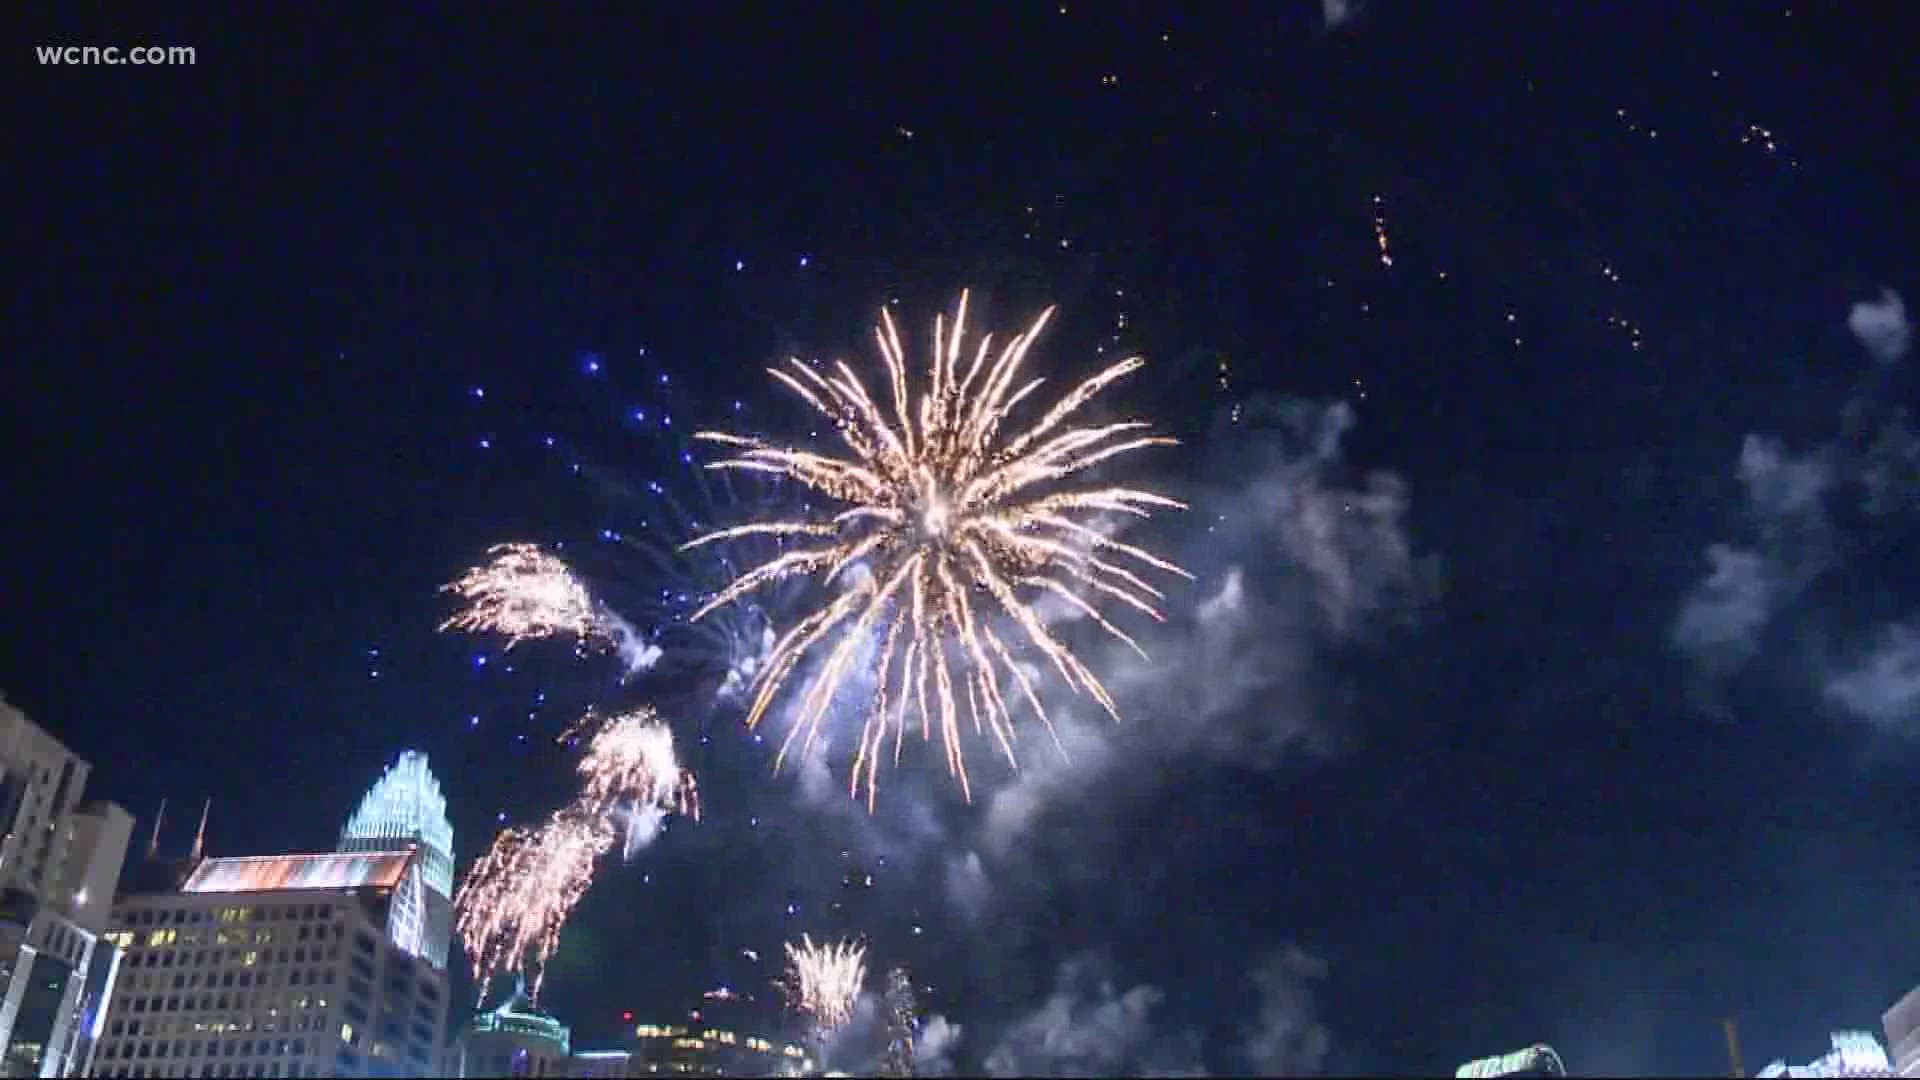 The Charlotte Knights said they will be cancelling the fireworks show because of the pandemic. They hope to reschedule later this year.